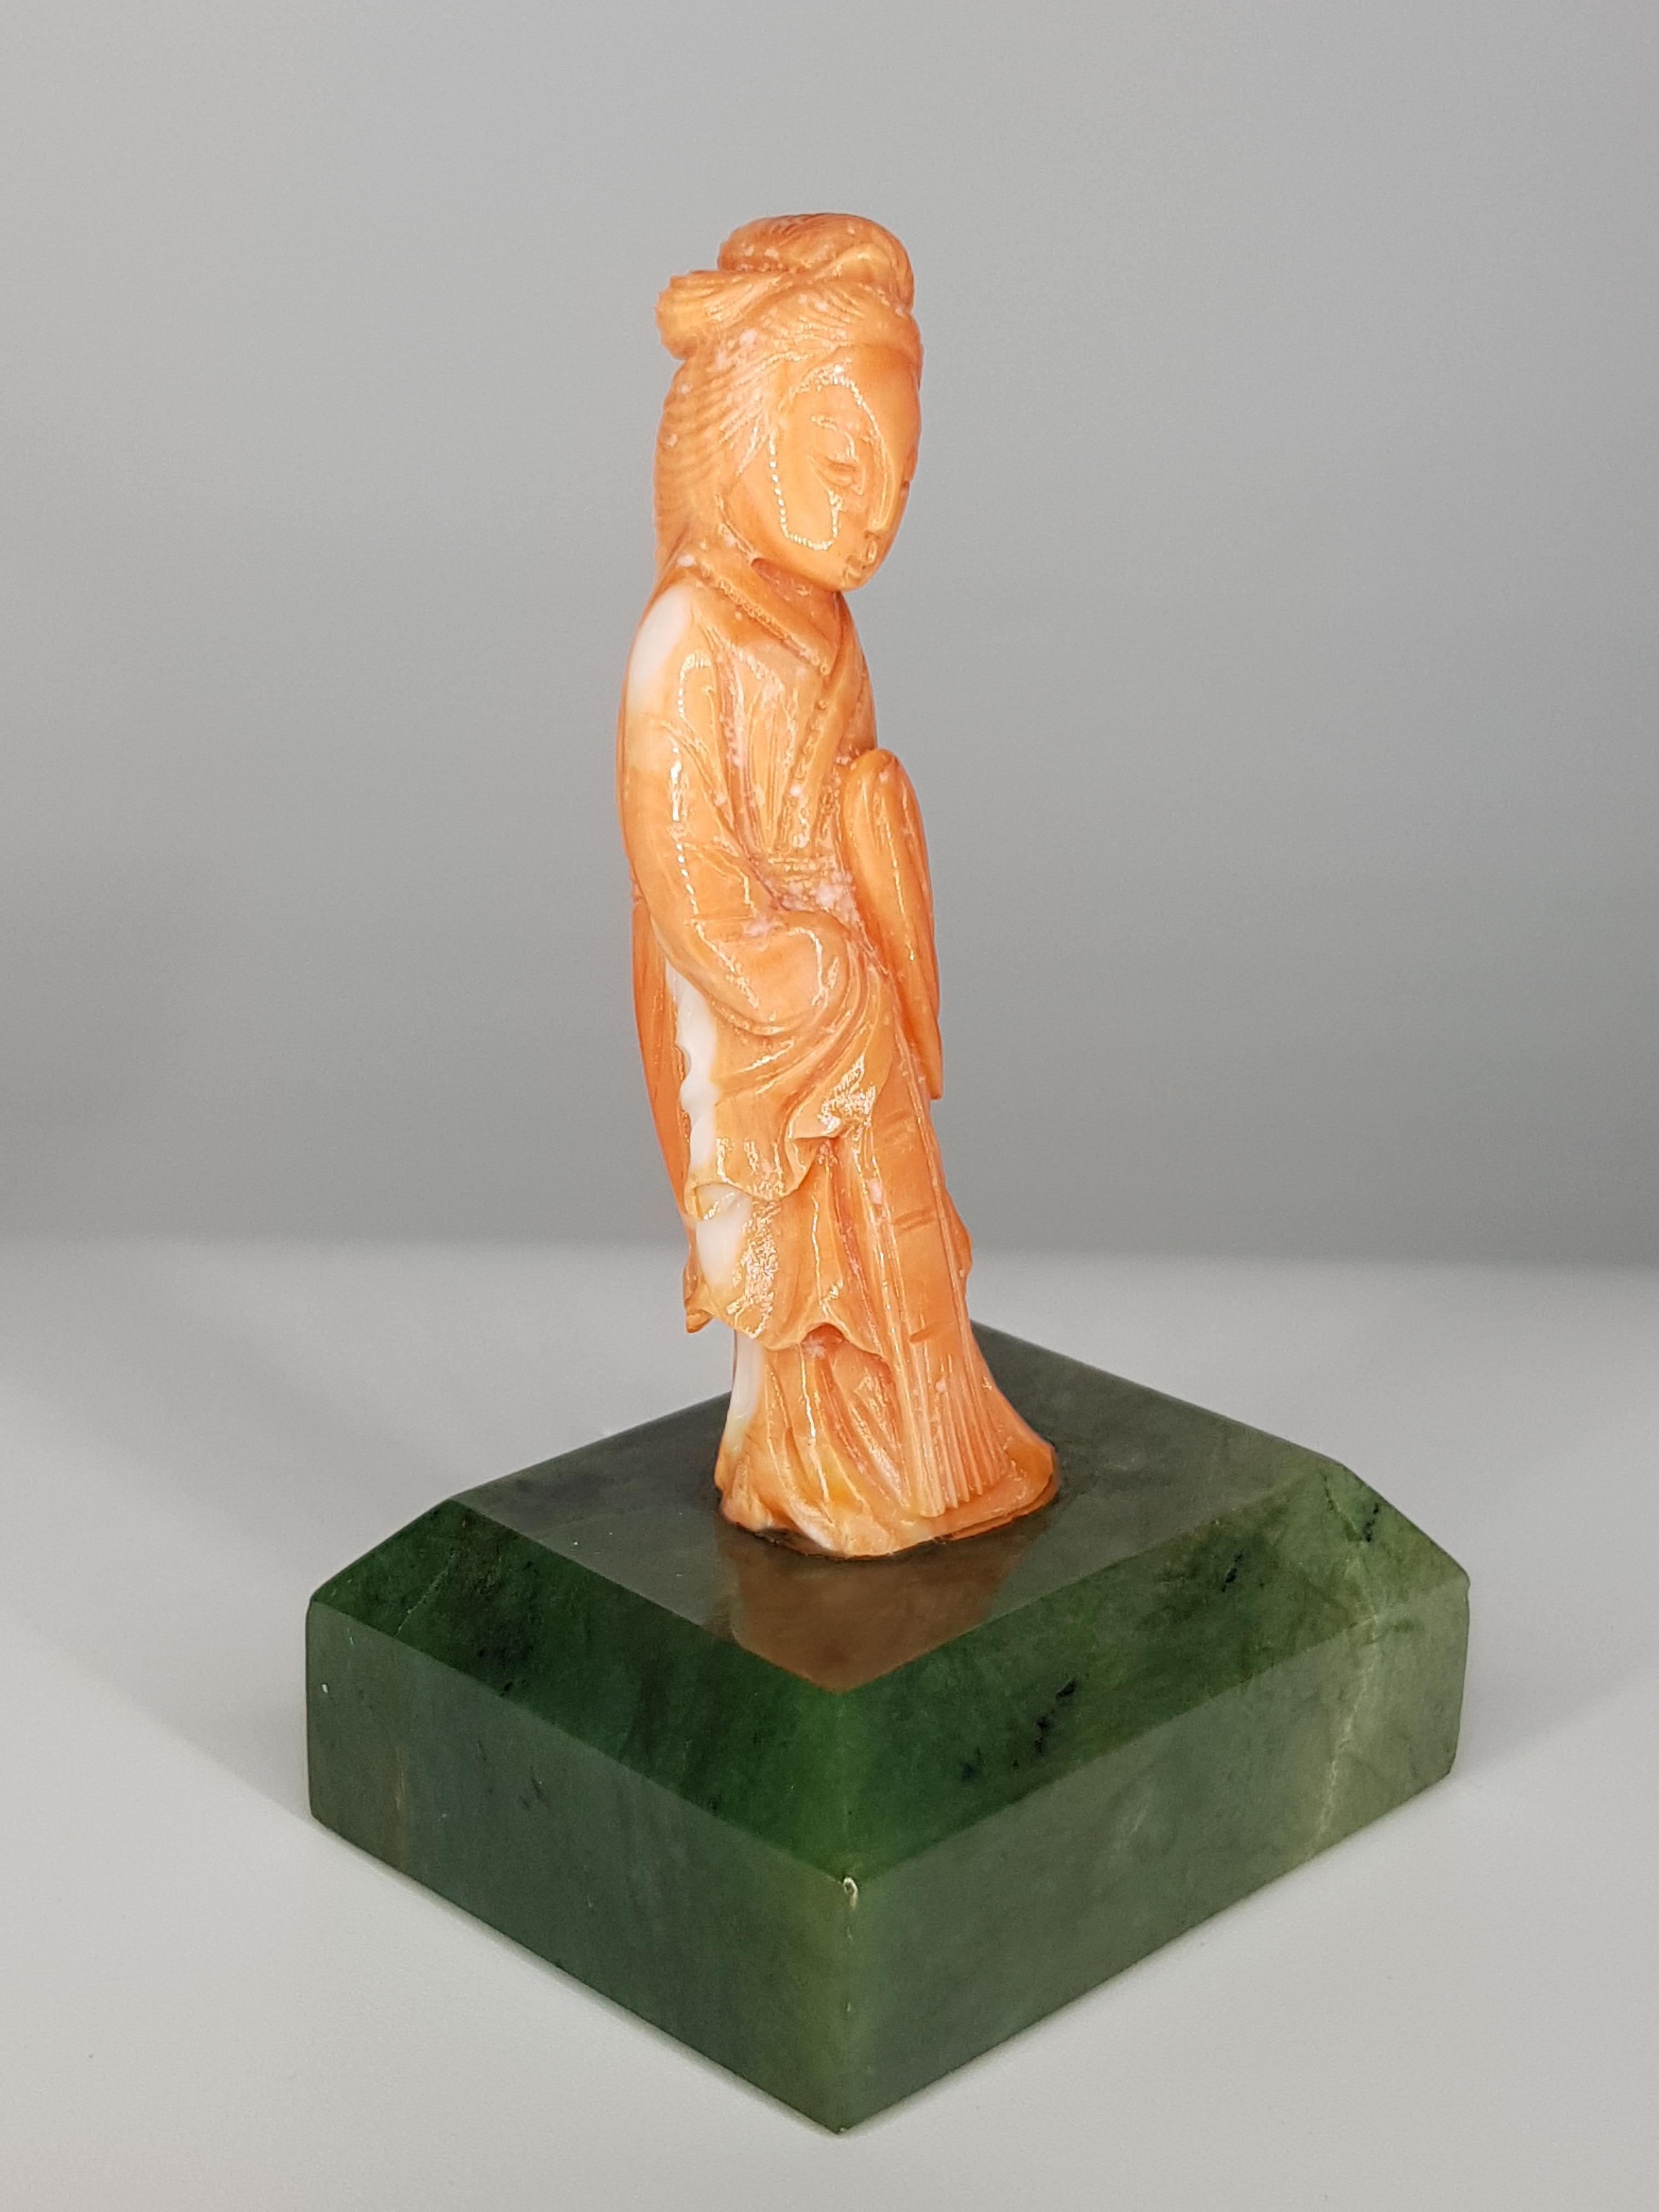 This finely engraved coral Figurine rests on a jade base.
It is an exquisitely crafted piece dating from the early twentieth century

Unique Piece